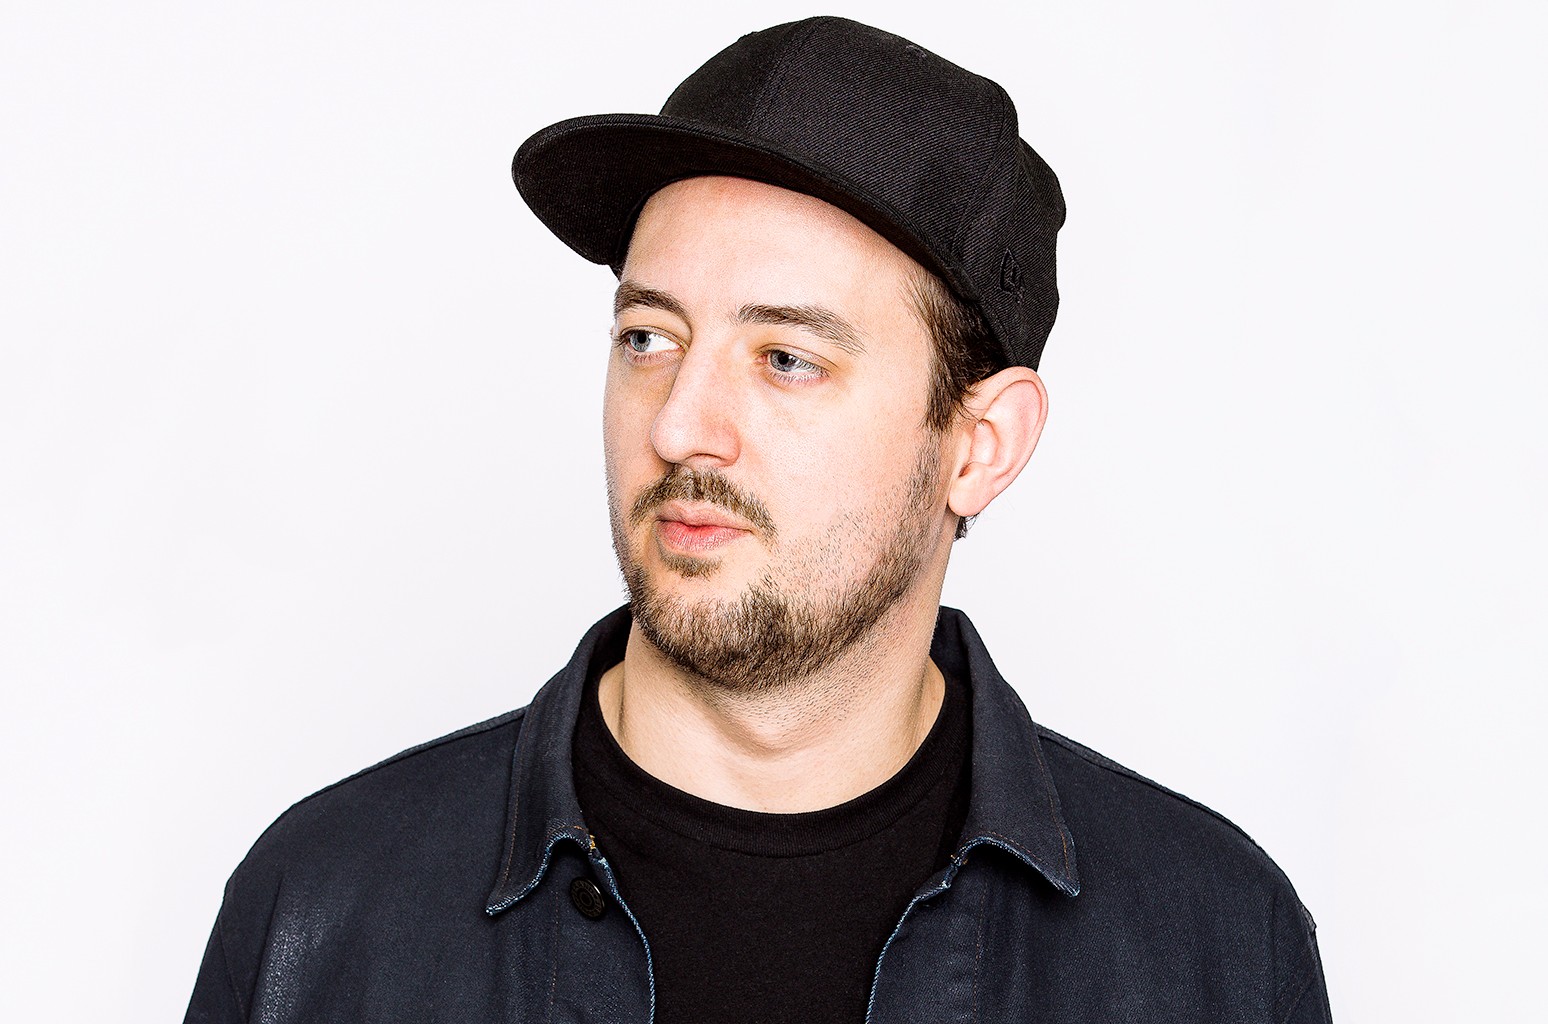 'The Drug Became the Only Thing I Thought About': Wolfgang Gartner on Anxiety, Rehab & This 'Incredibly Optimistic' Career Moment